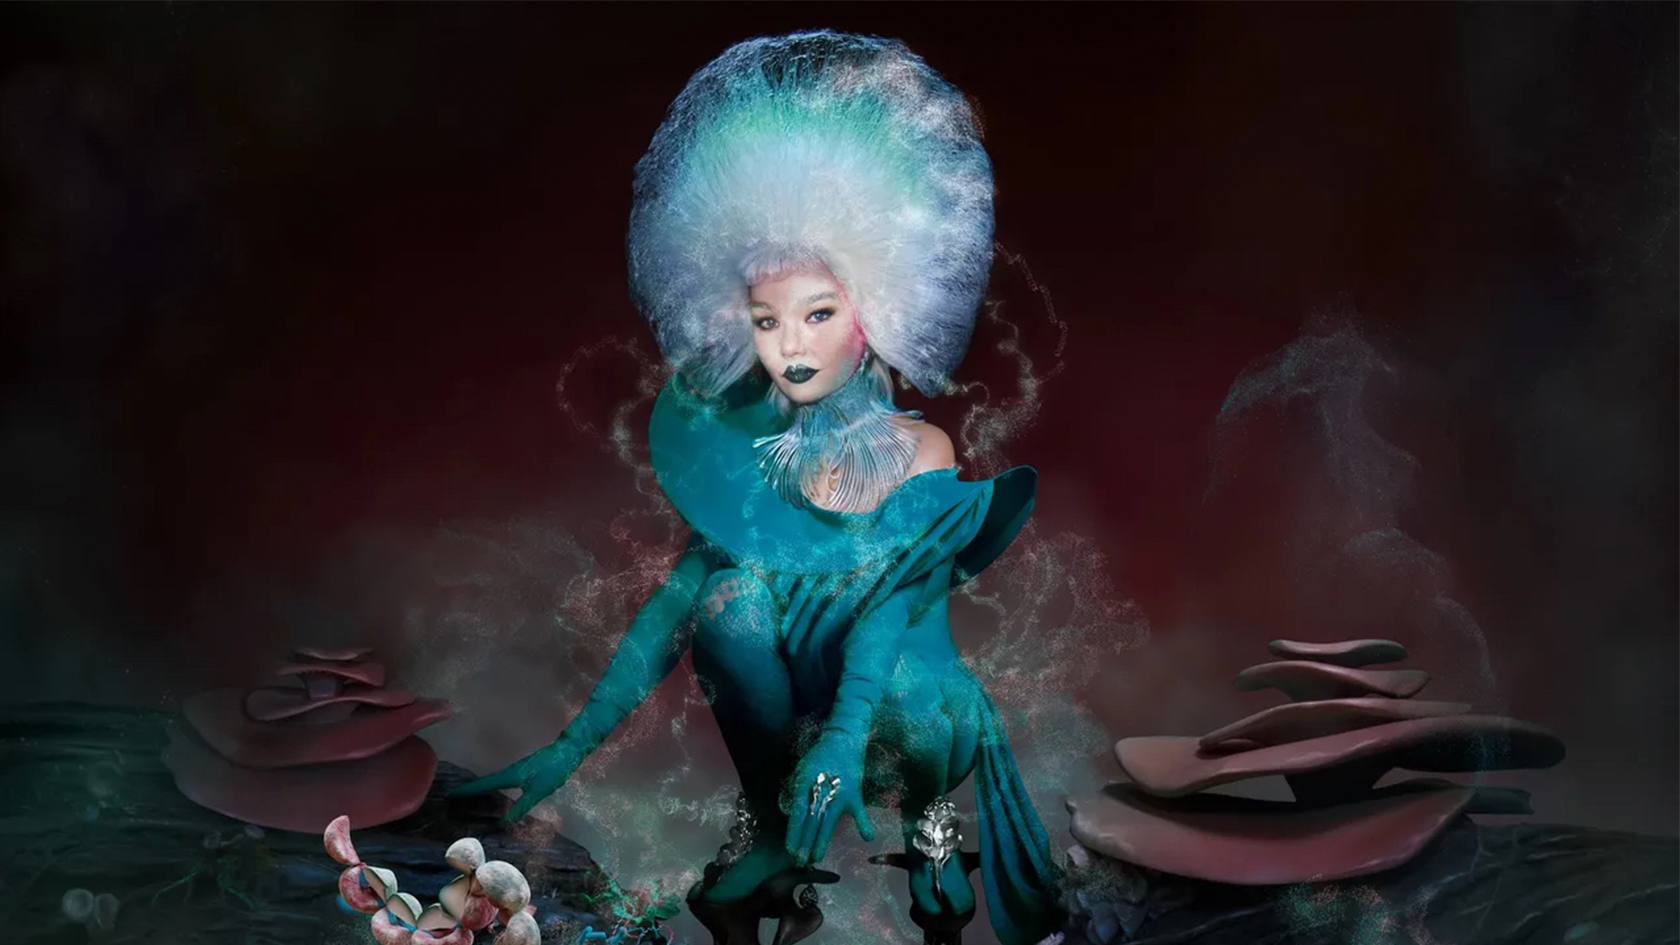 Björk Releases Surreal Video For New Track ‘Ancestress’ Ahead Of Album